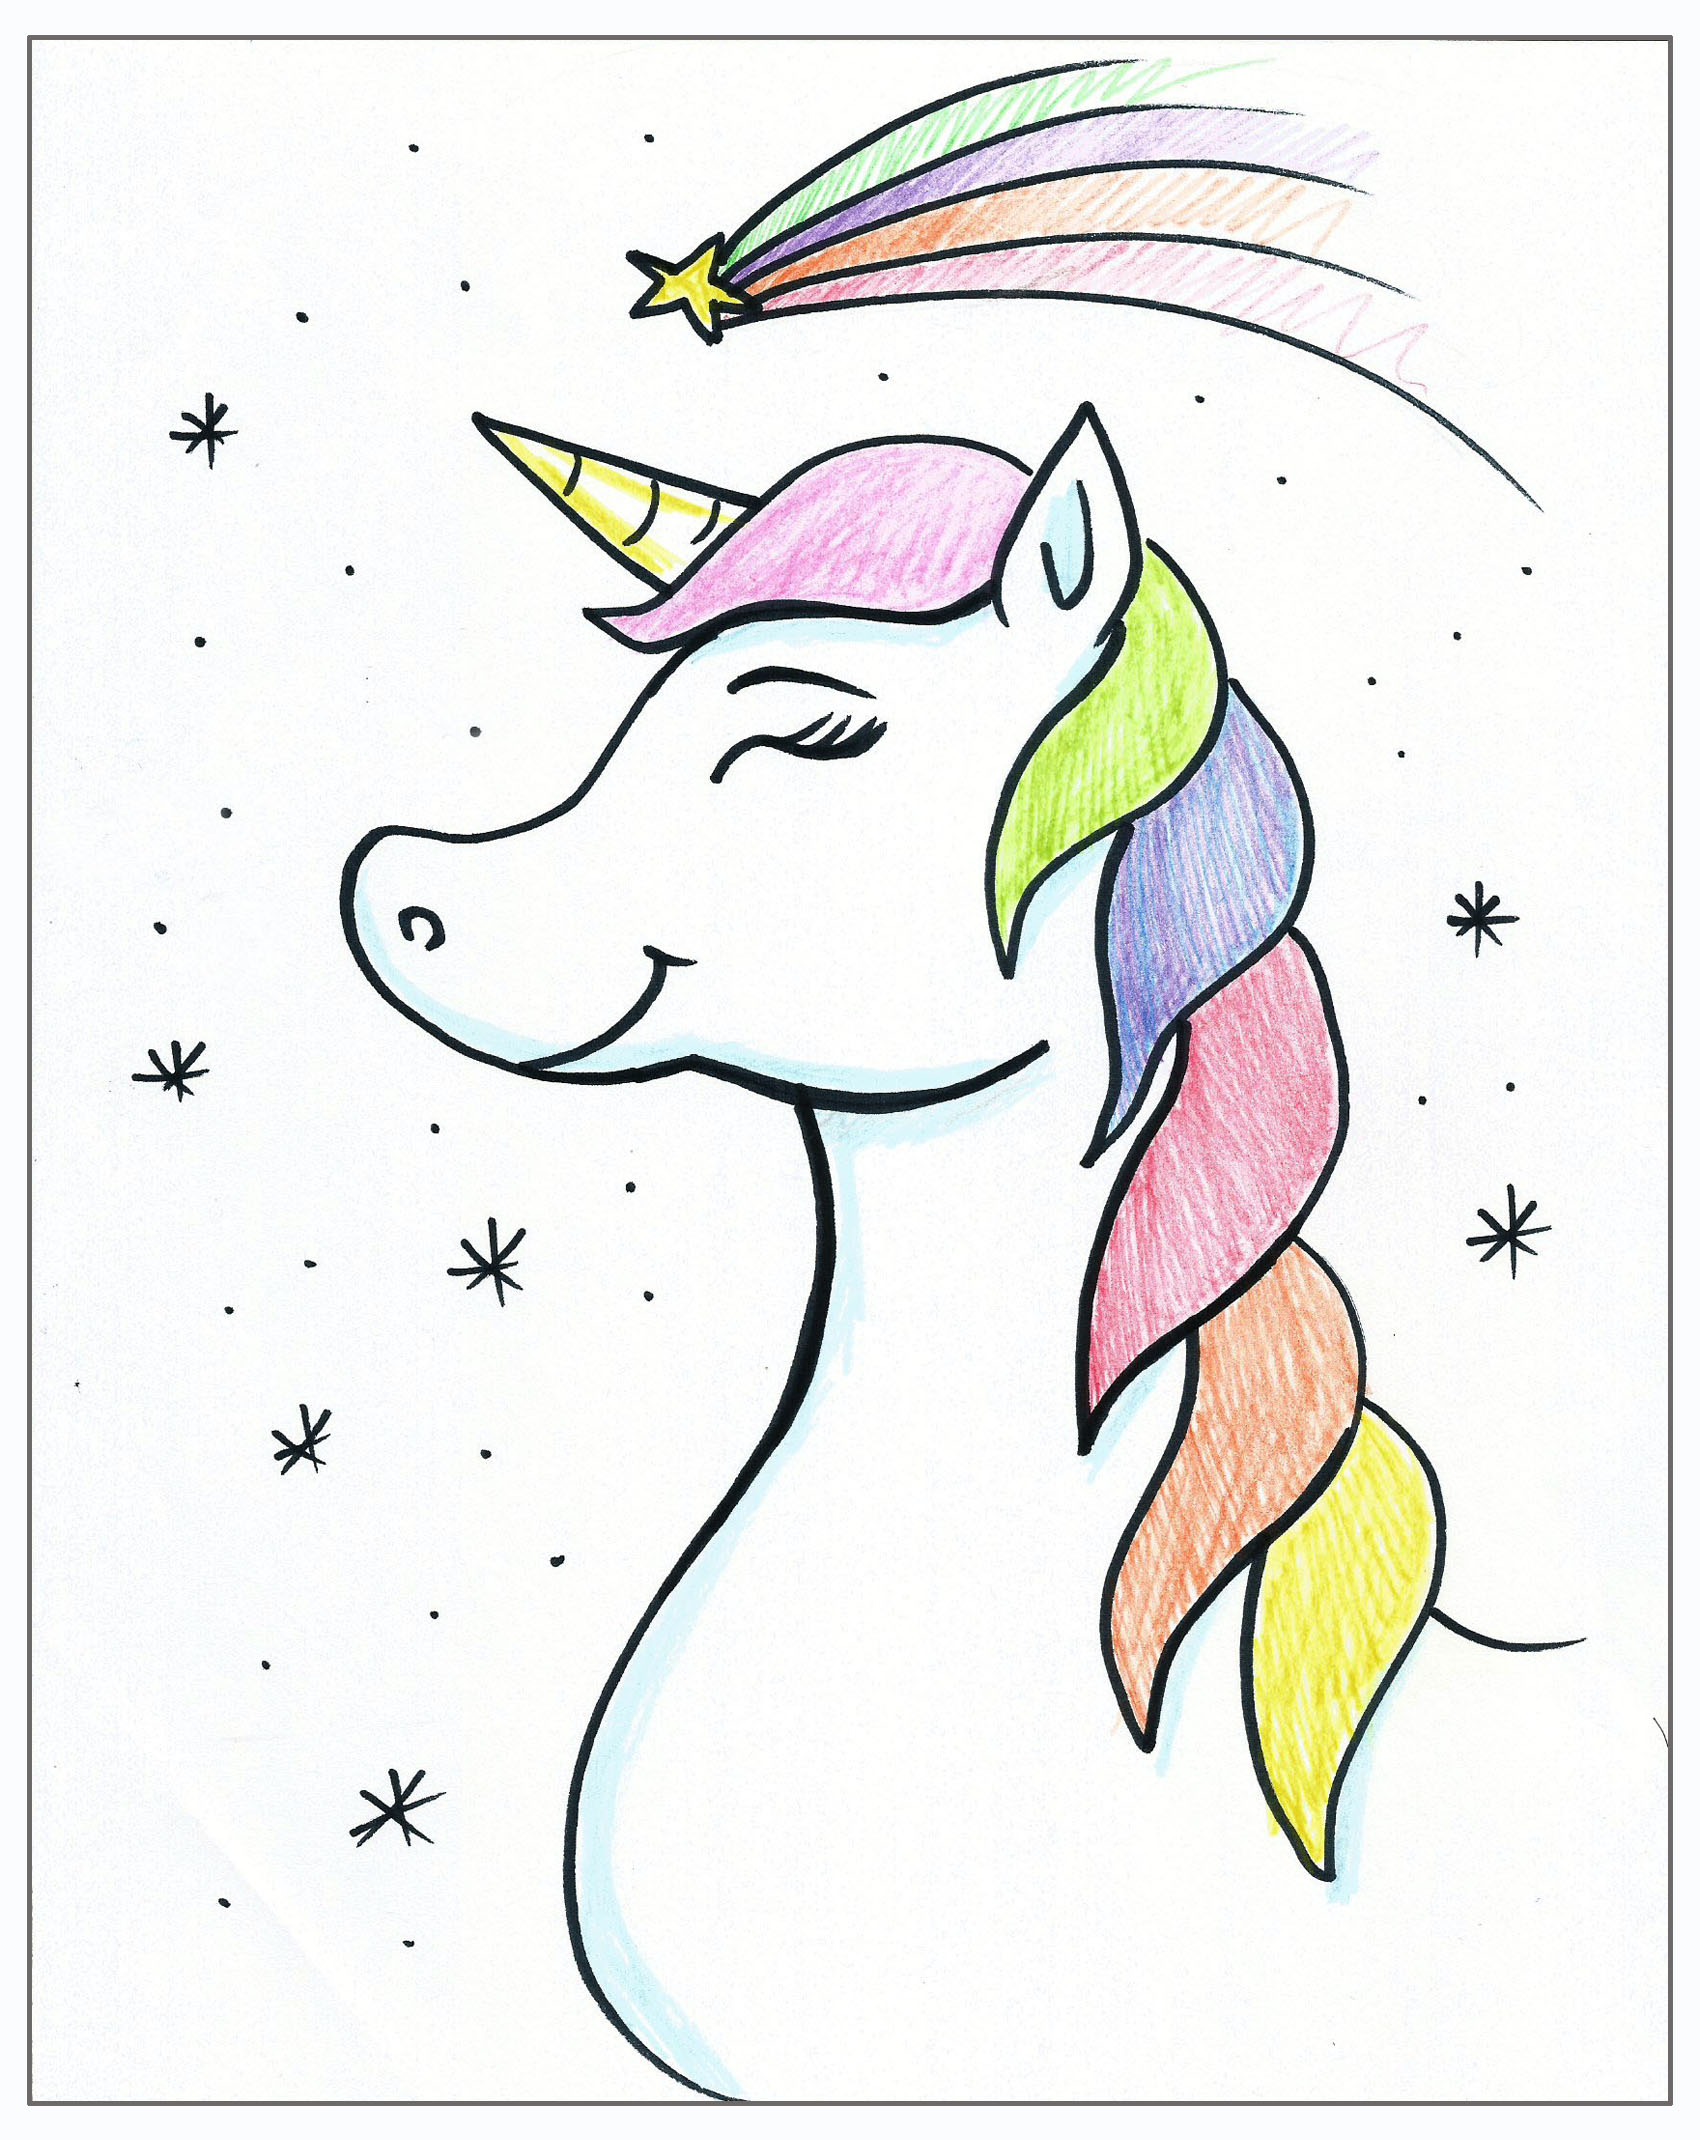 A Draw And Color A Unicorn  Virtual Event experience project by Yaymaker